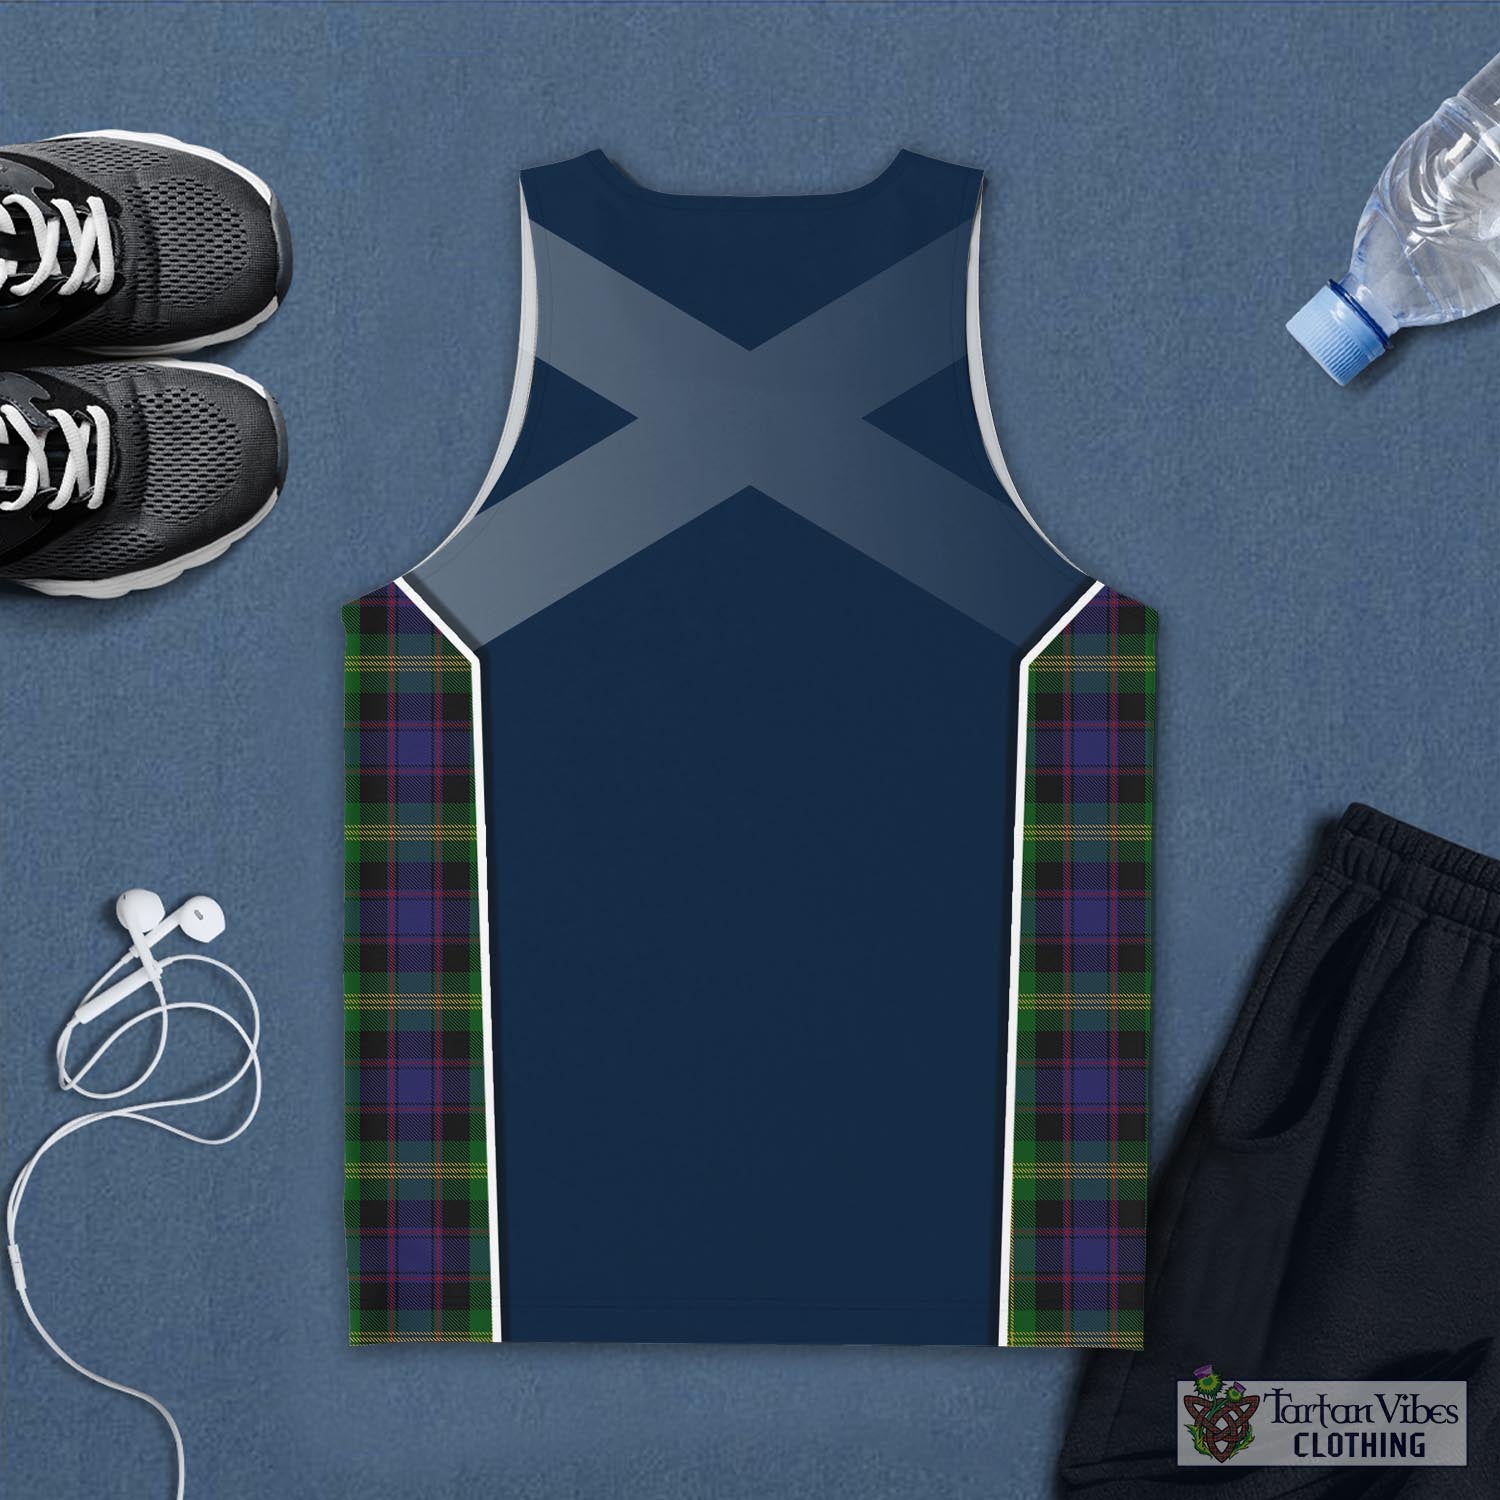 Tartan Vibes Clothing Watson Tartan Men's Tanks Top with Family Crest and Scottish Thistle Vibes Sport Style